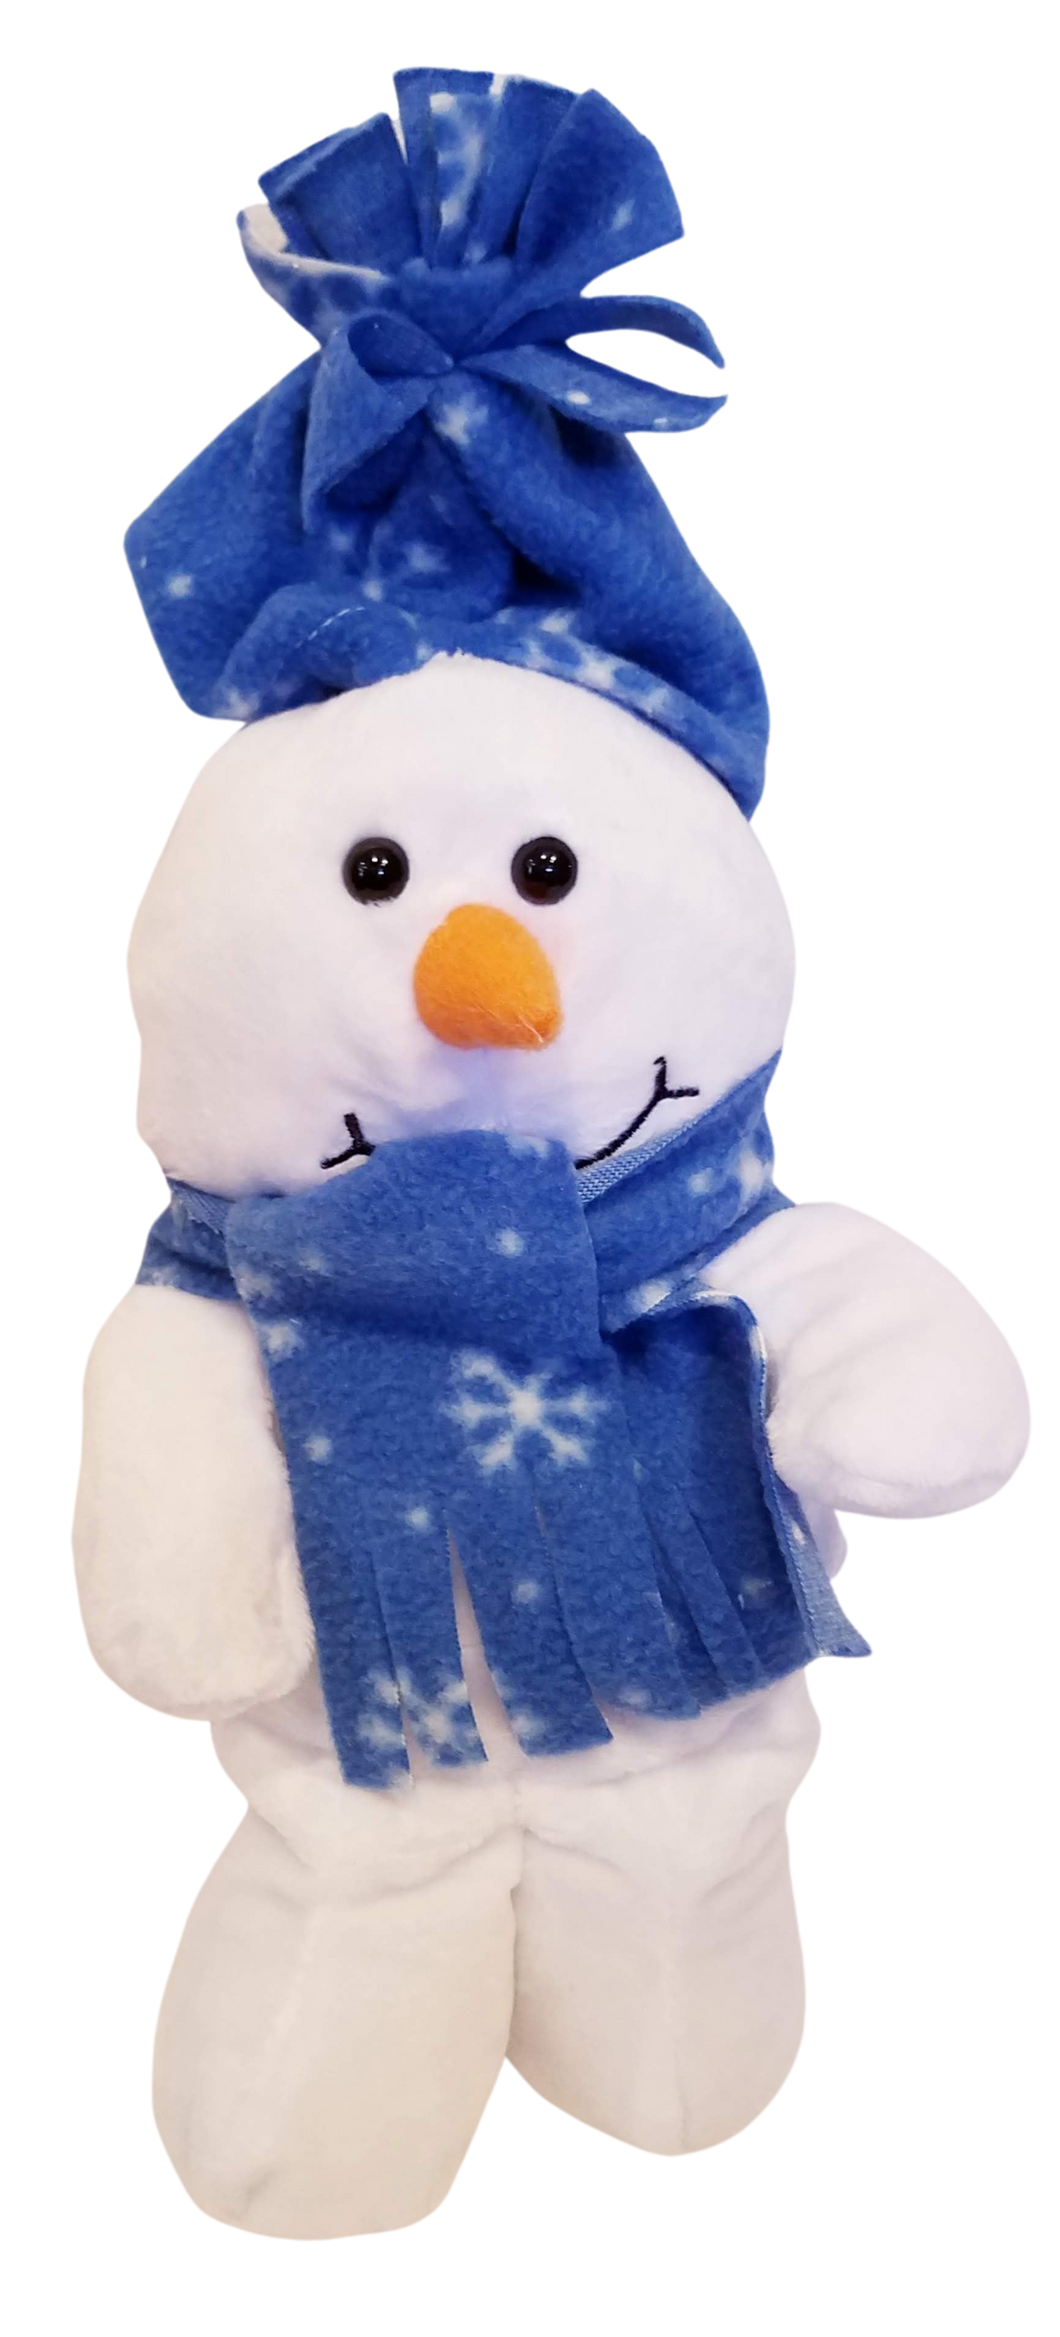 Plush snowman with blue hat/blue scarf with snowflakes 12